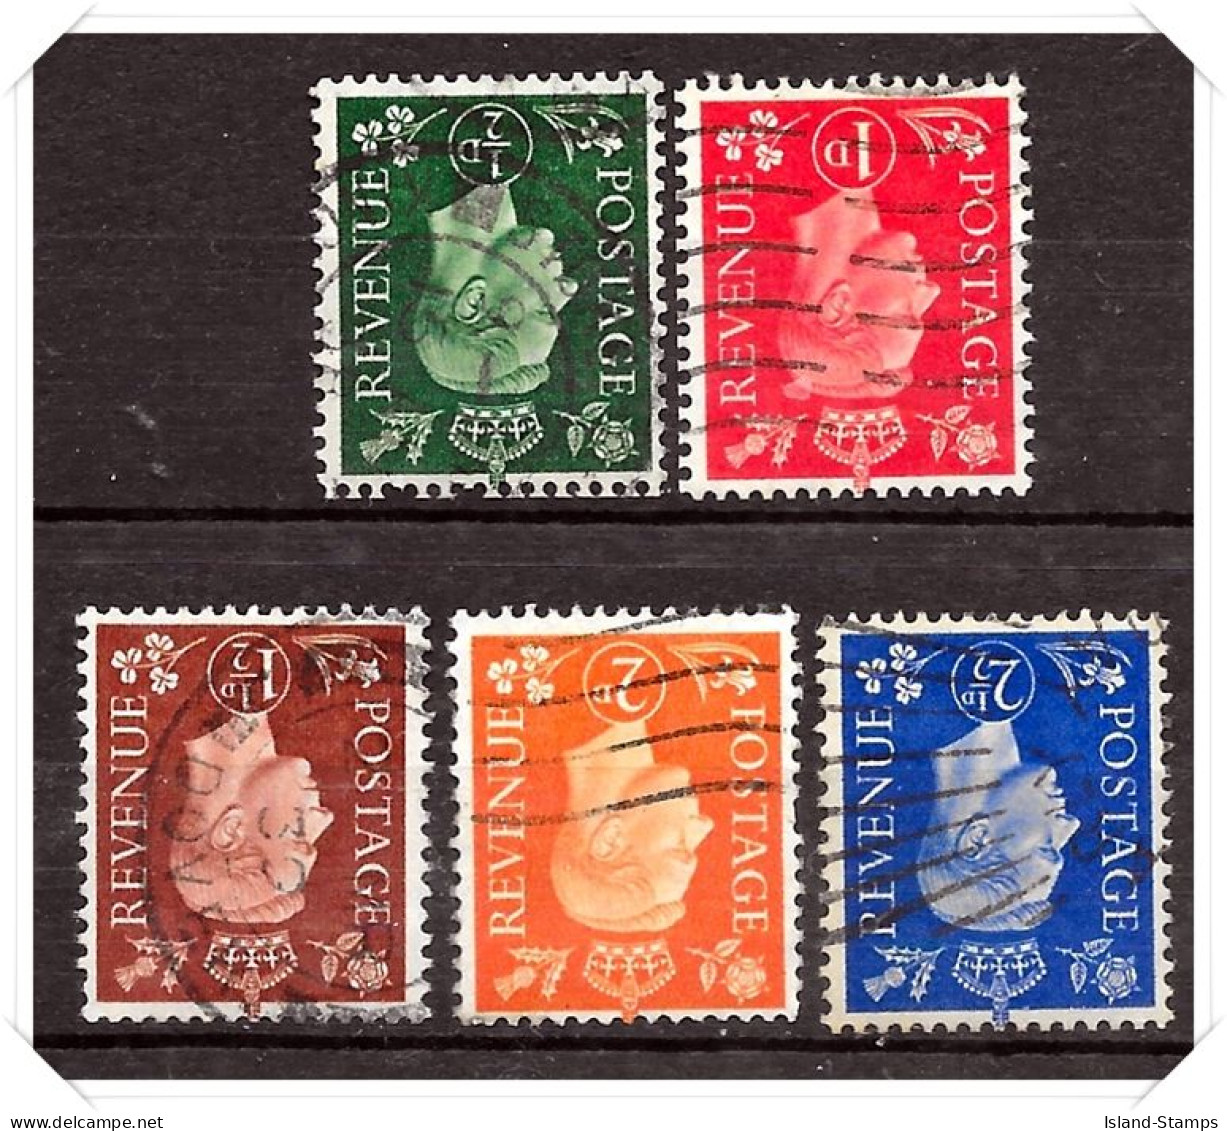 KGVI 1937 Definitives Inverted Watermark Set Of 5 SG462wi - SG466wi Fine Used Hrd2a - Ungebraucht